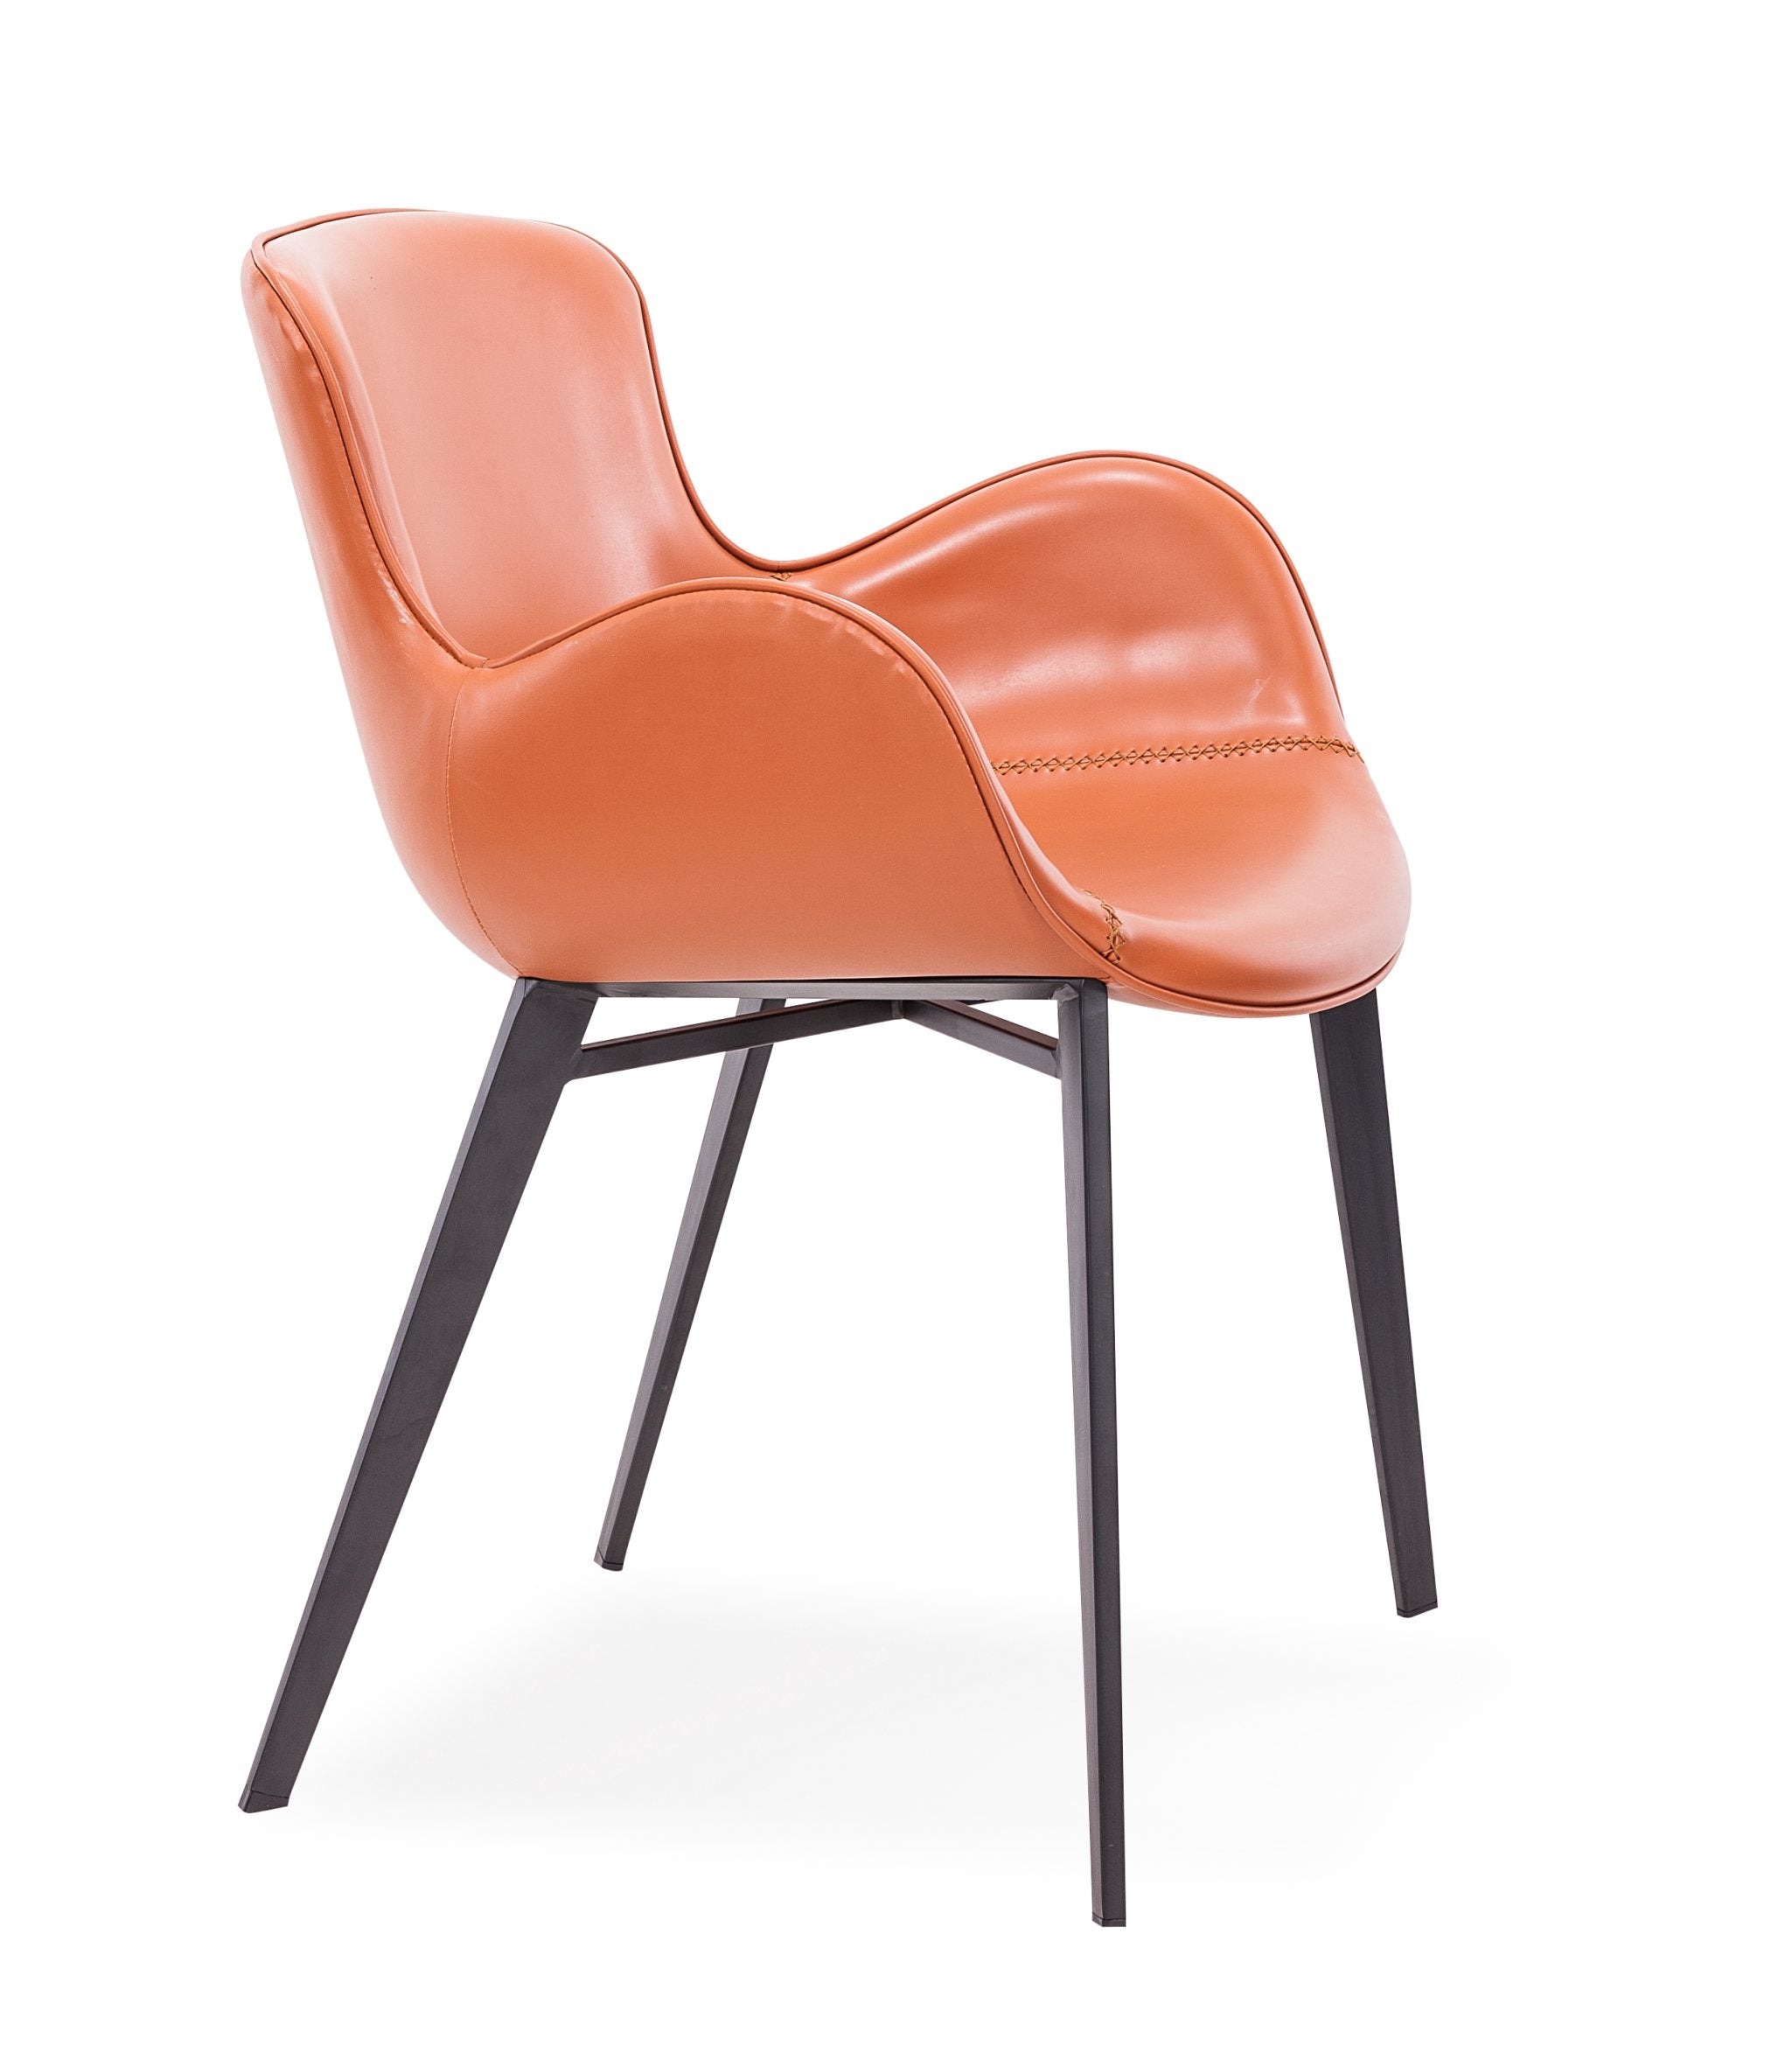 Modrest Tayla - Modern Cognac Eco-Leather Dining Chair-Dining Chair-VIG-Wall2Wall Furnishings